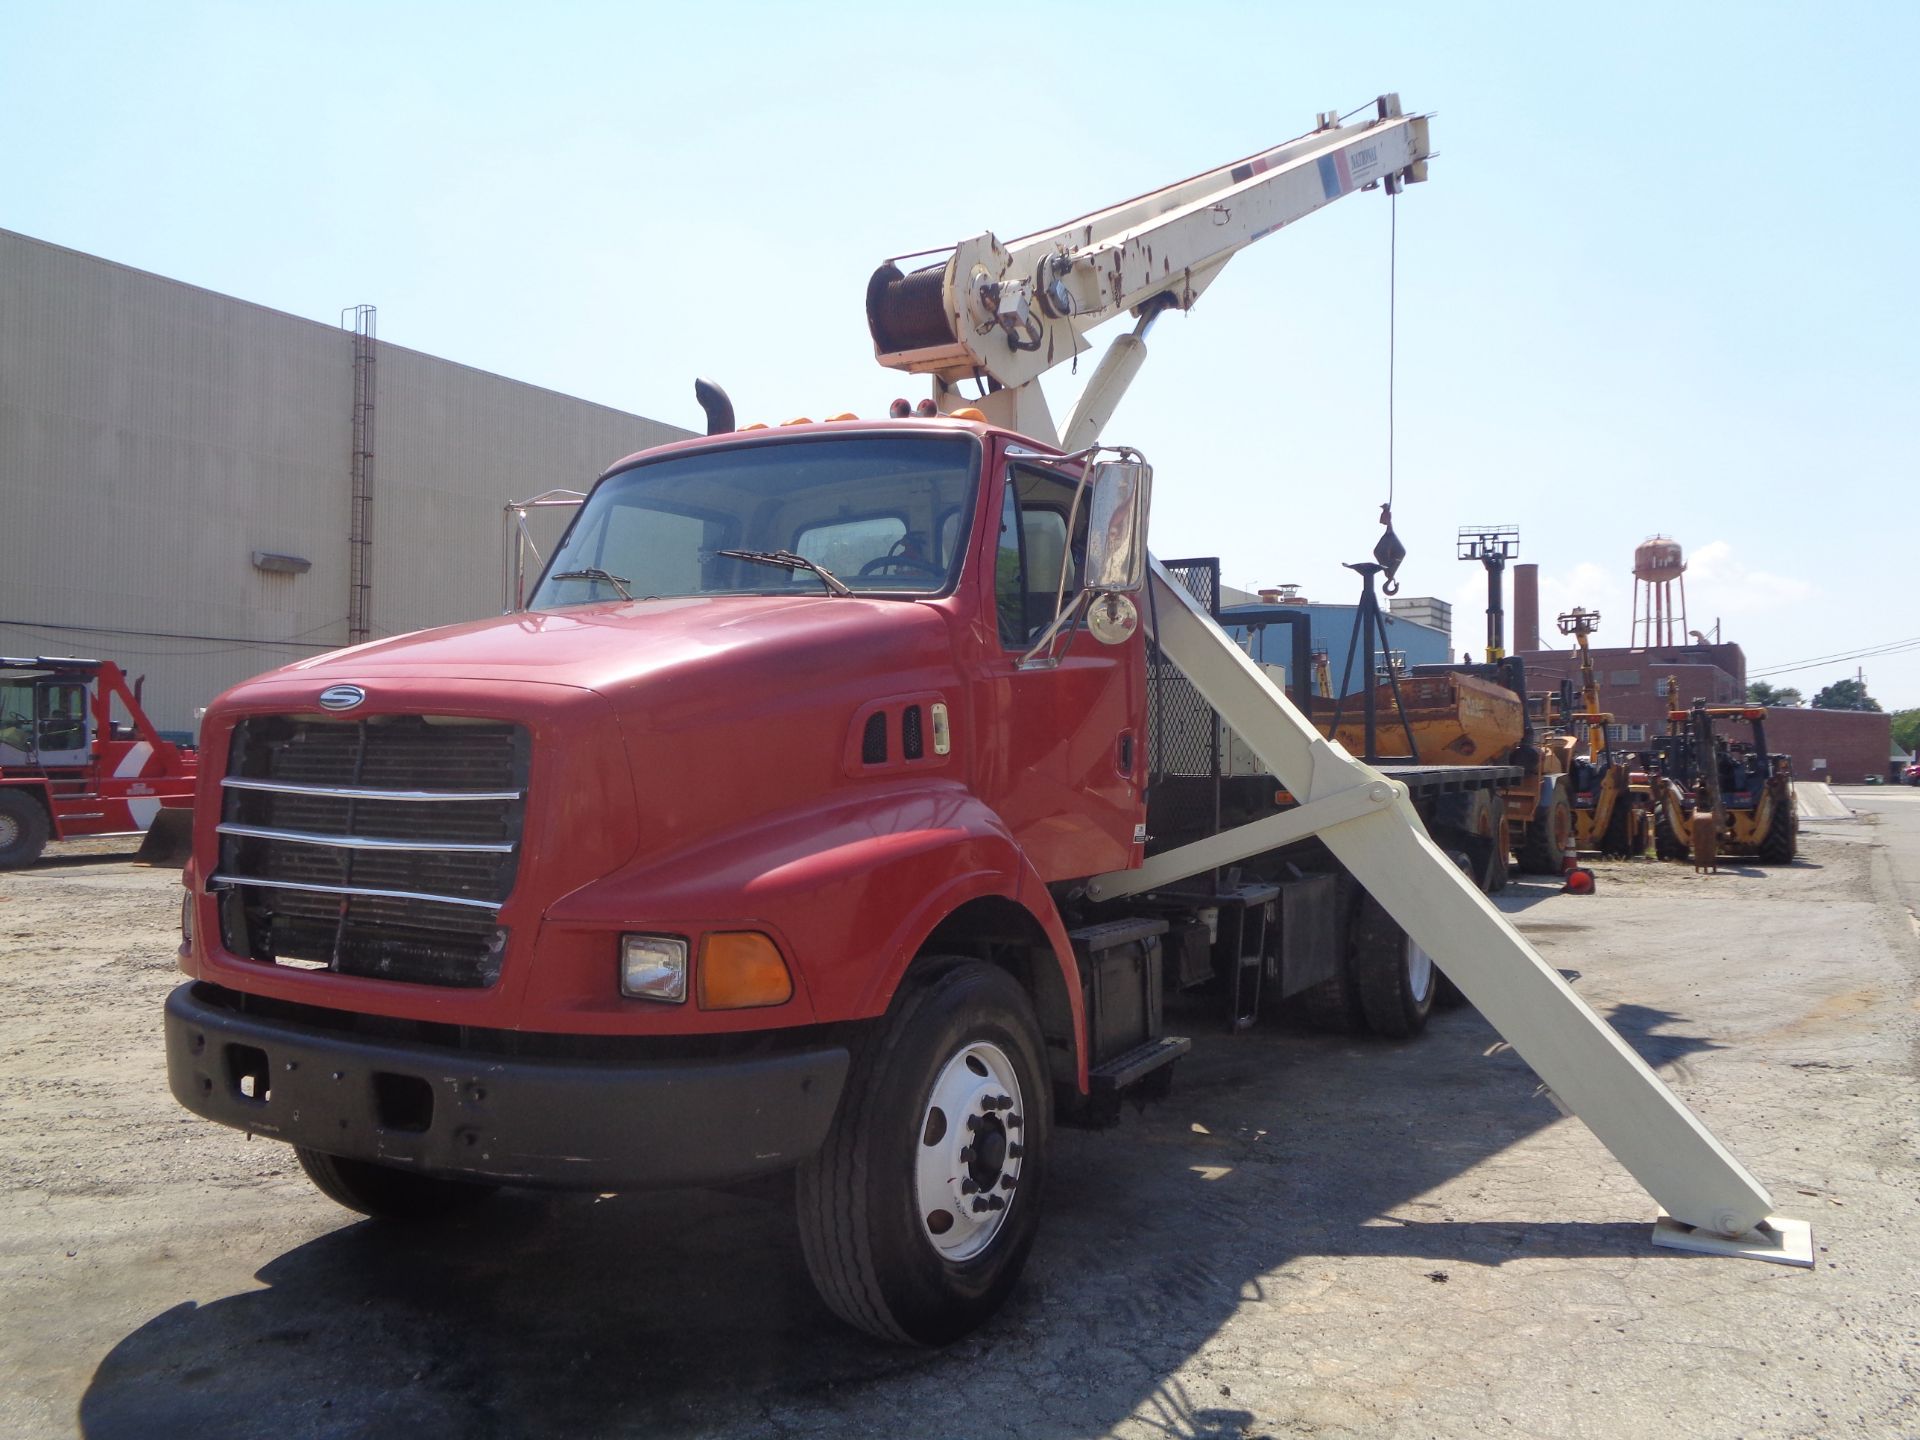 National 681C 17Ton Hydraulic Crane mounted behind cab on Sterling LT8500 T/A Flatbed Truck - Image 8 of 28